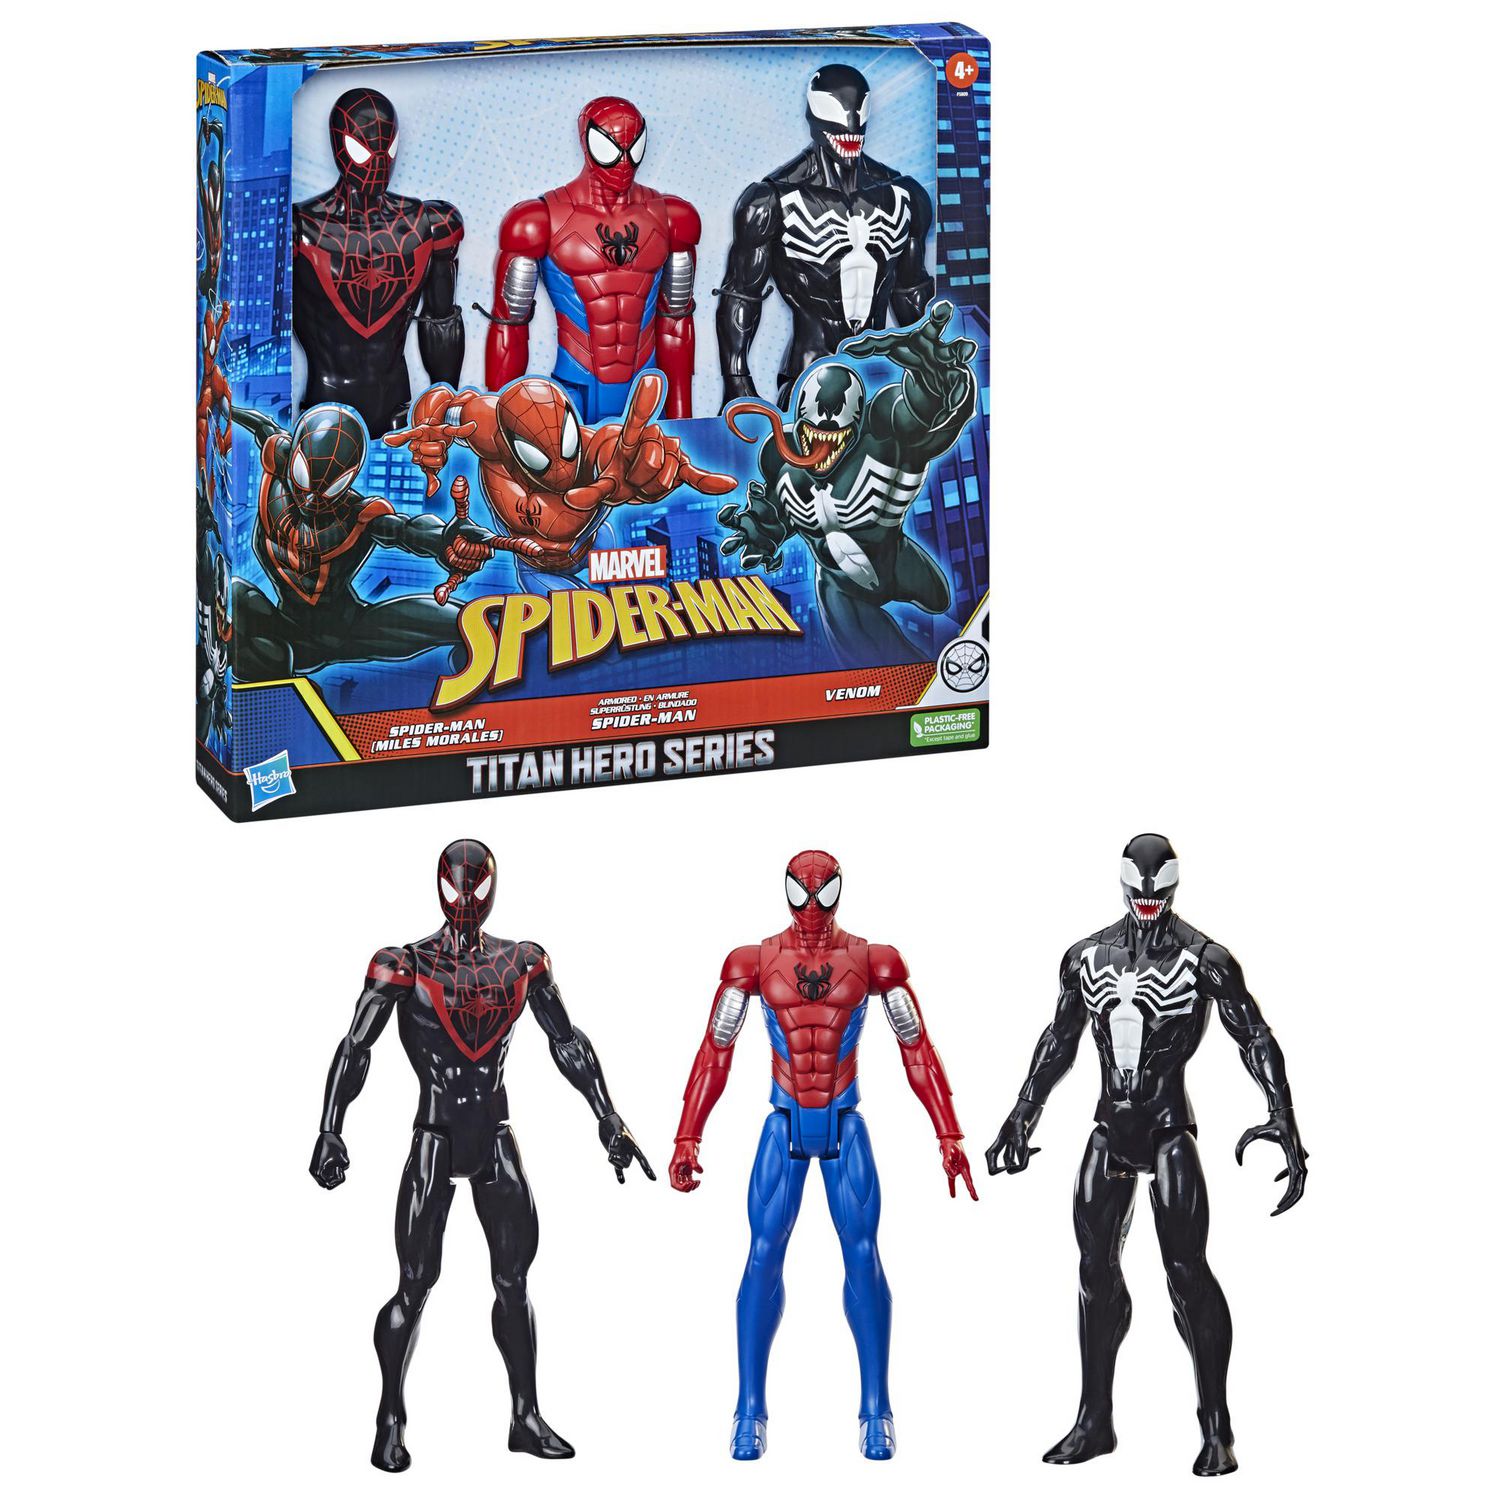 Marvel Spideman Titan Hero Series 3-Figure Pack - Features Miles Morales,  Spiderman & Venom with Blast Gear, Ages 4 and Up